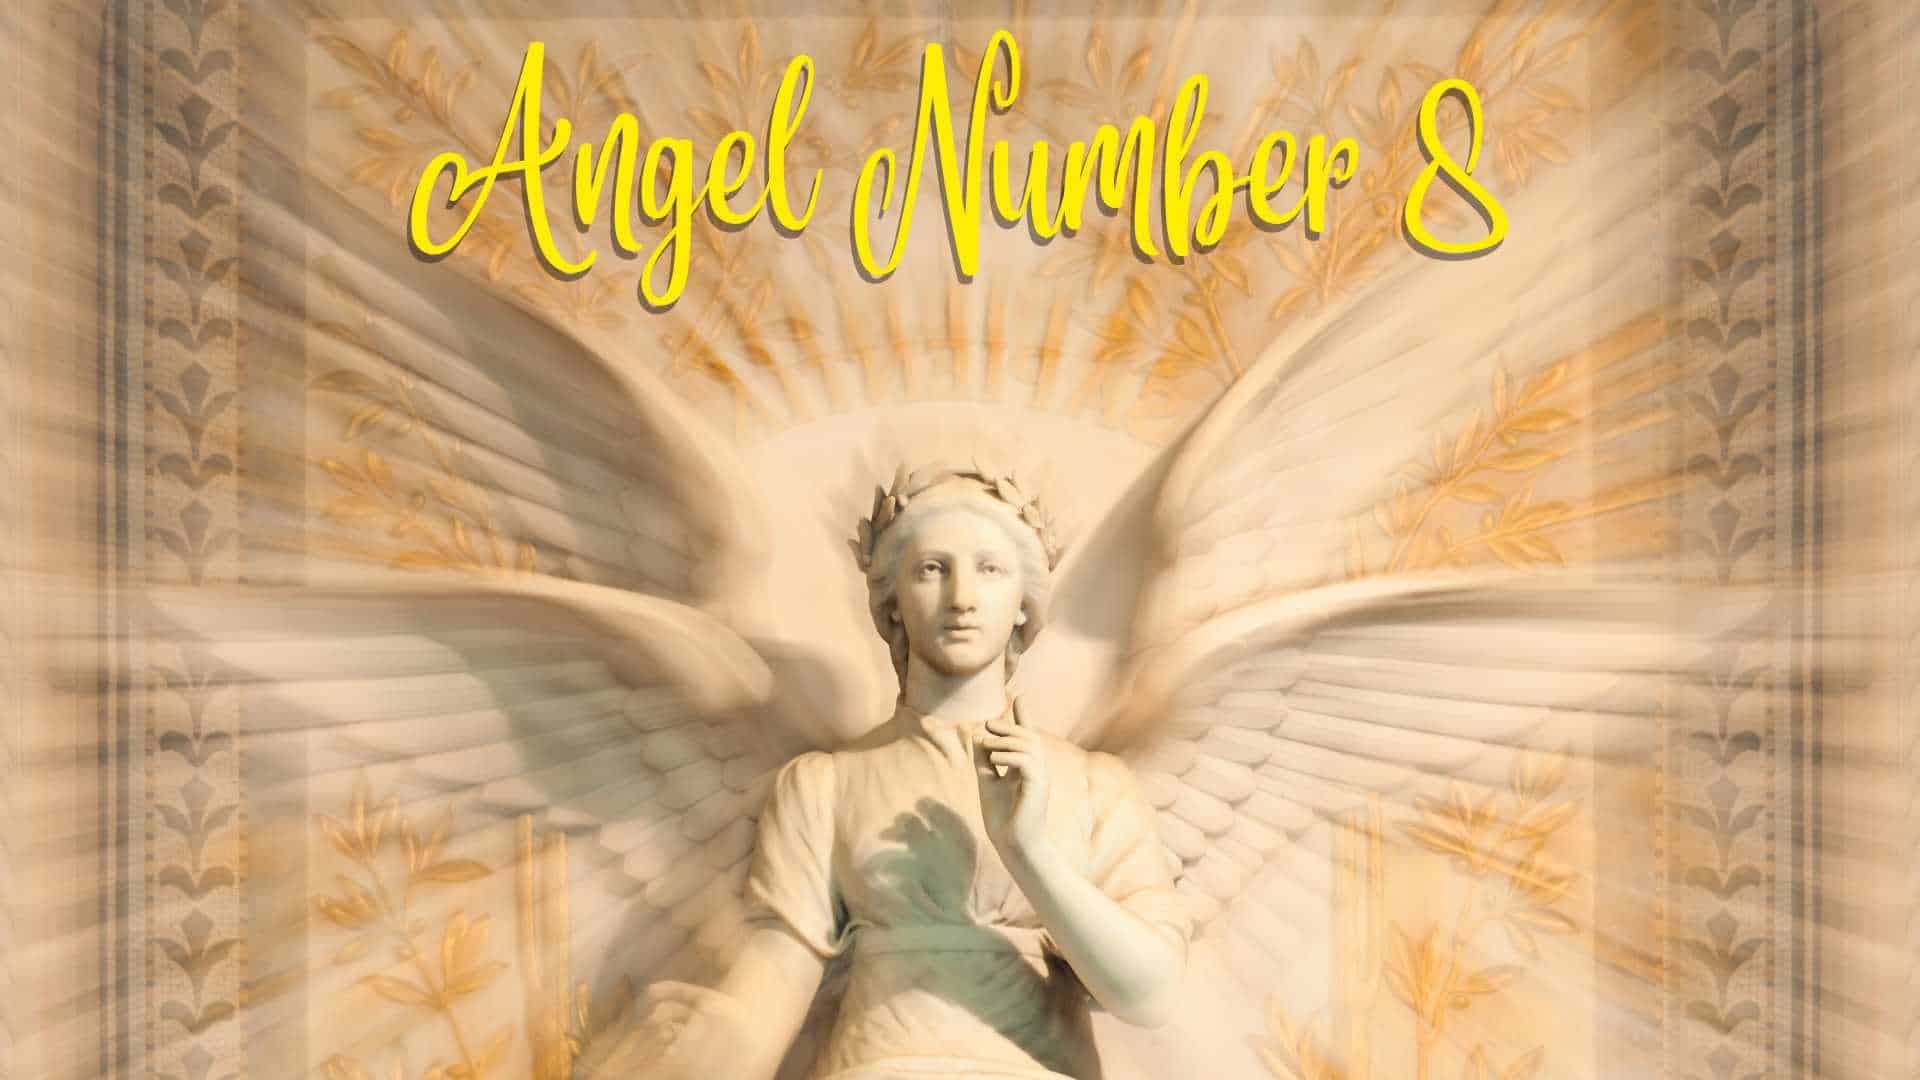 Angel Number 8 Meaning Featured Image